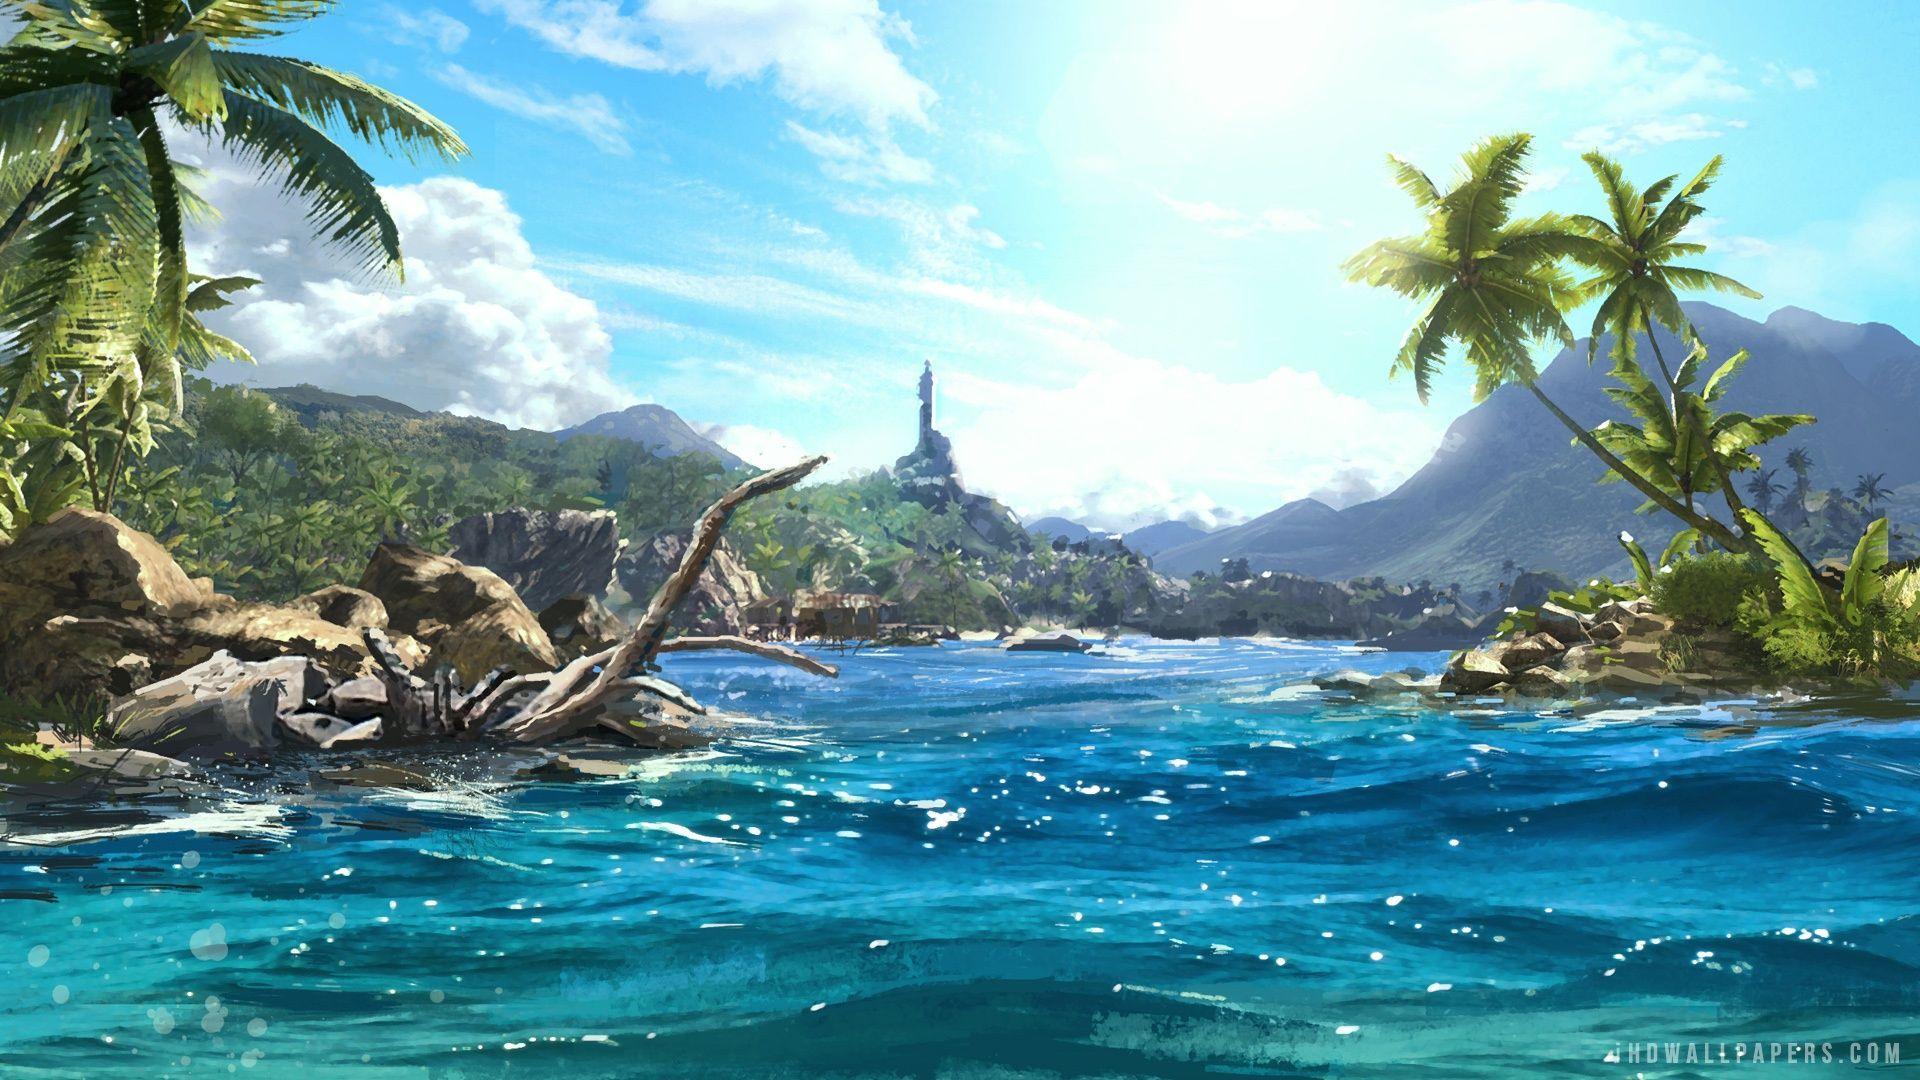 Far Cry 3 HD Wallpapers